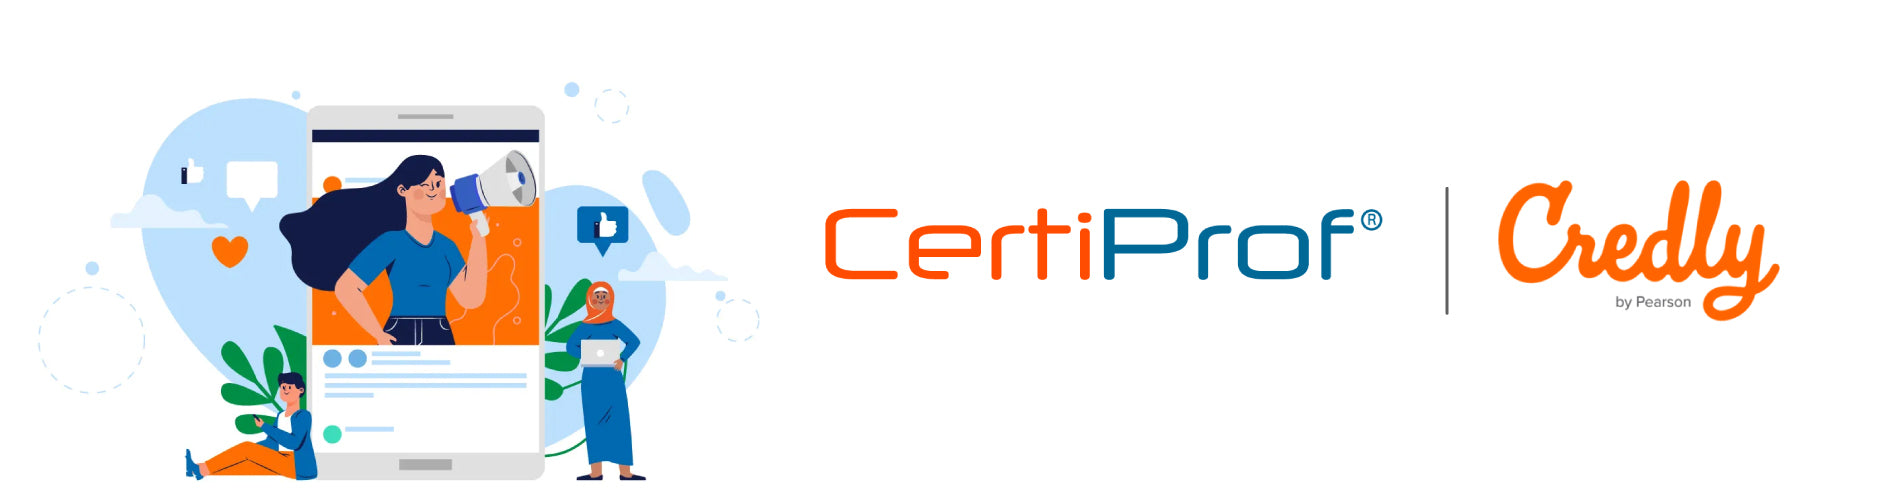 CertiProf Now Issues Digital Credentials through Credly